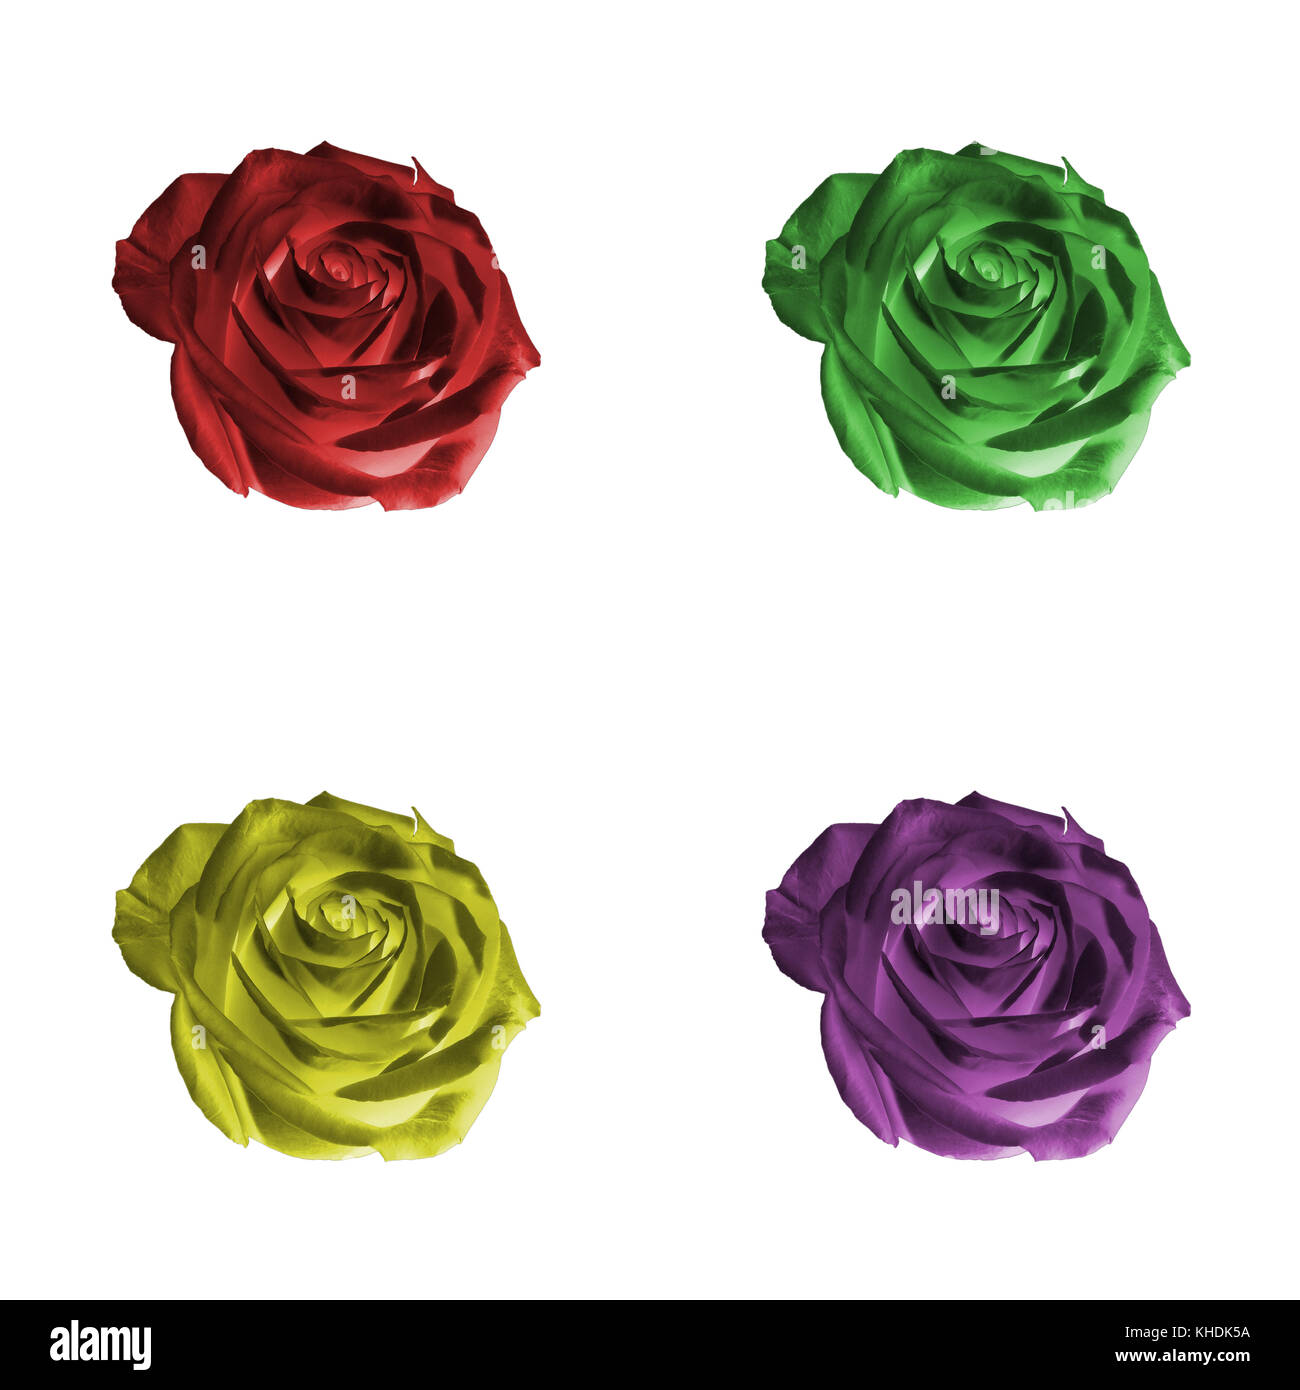 Floral pattern or background: set of four decorative colored (red, green, yellow, purple, violet) flowers - roses - closeup (close up) isolated on whi Stock Photo